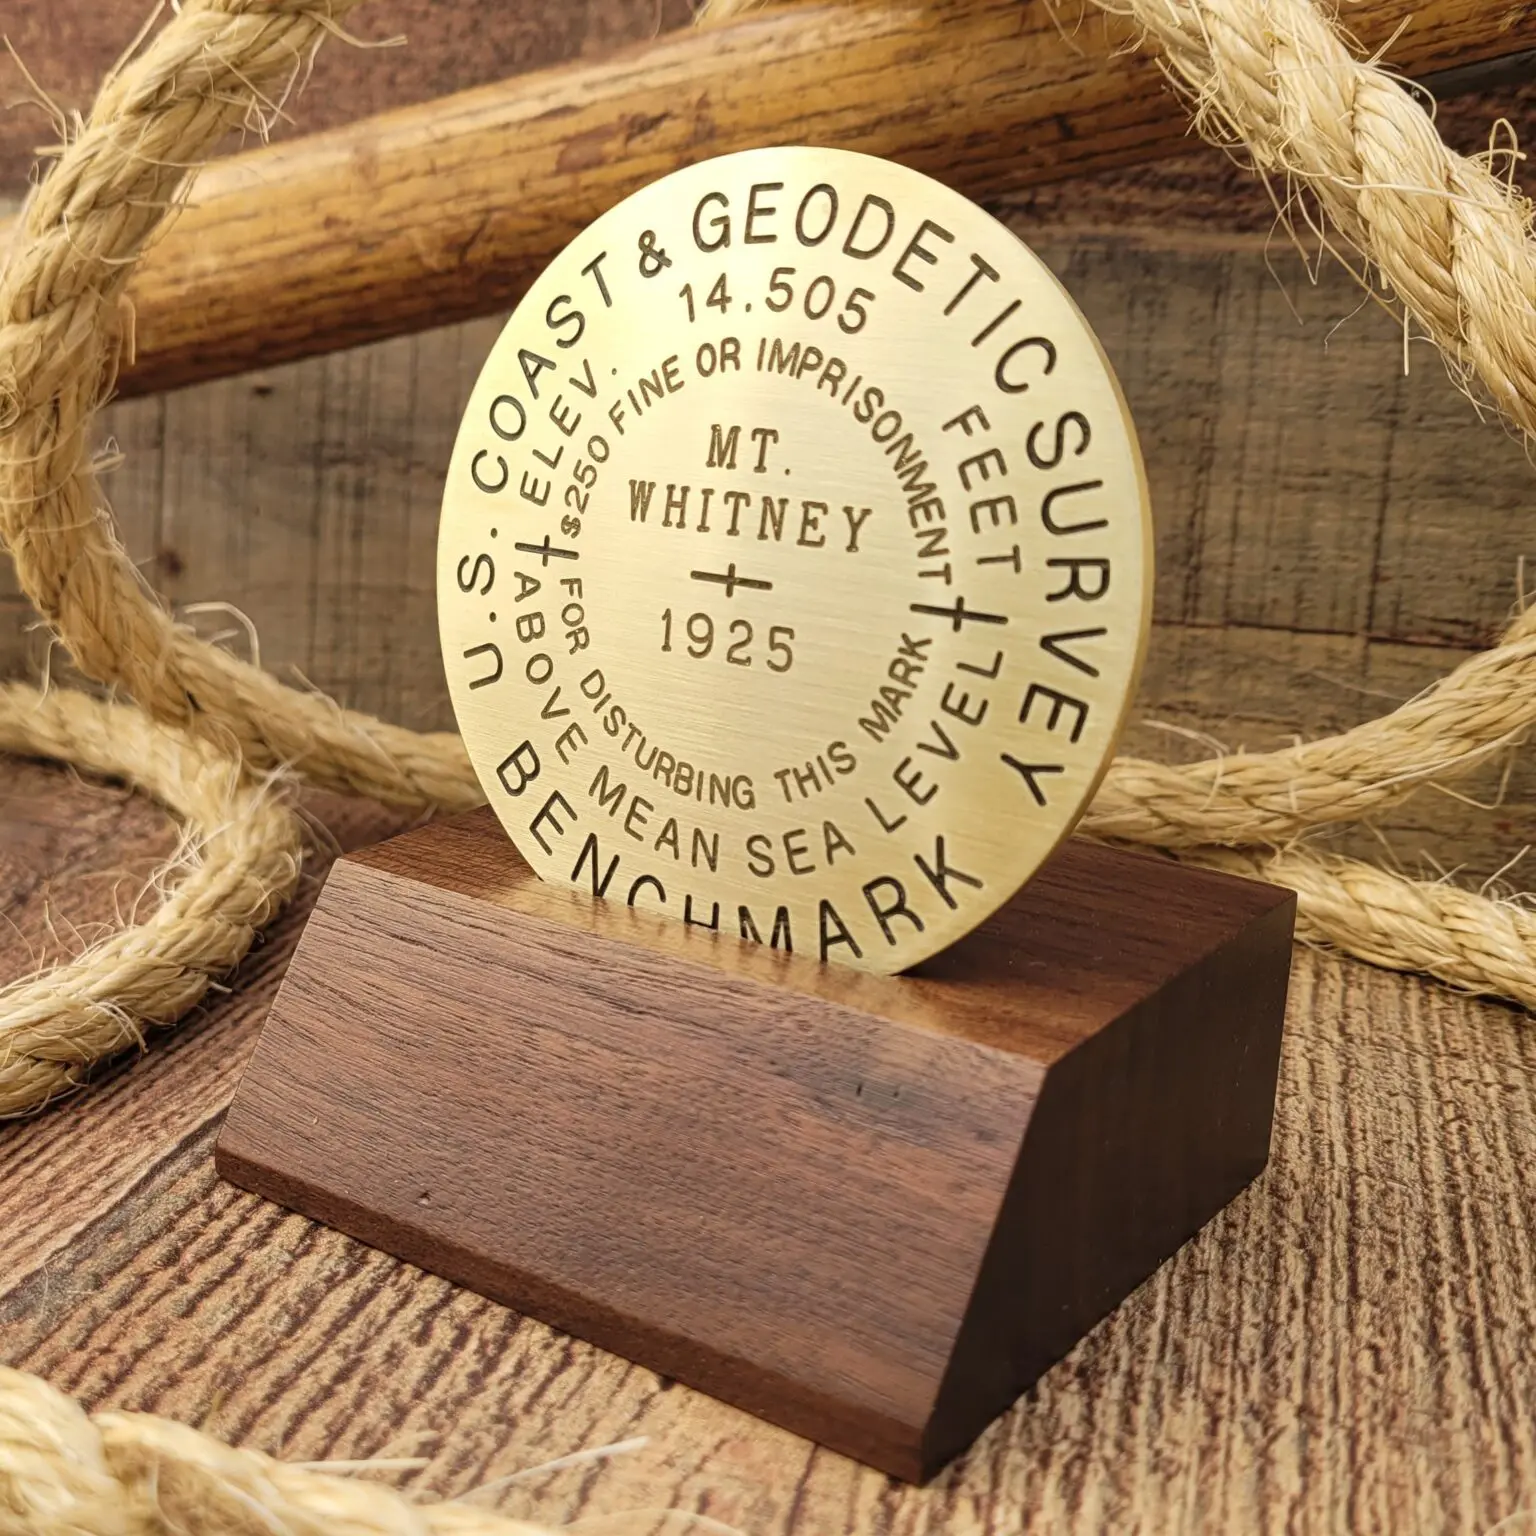 A brass based award with wooden base